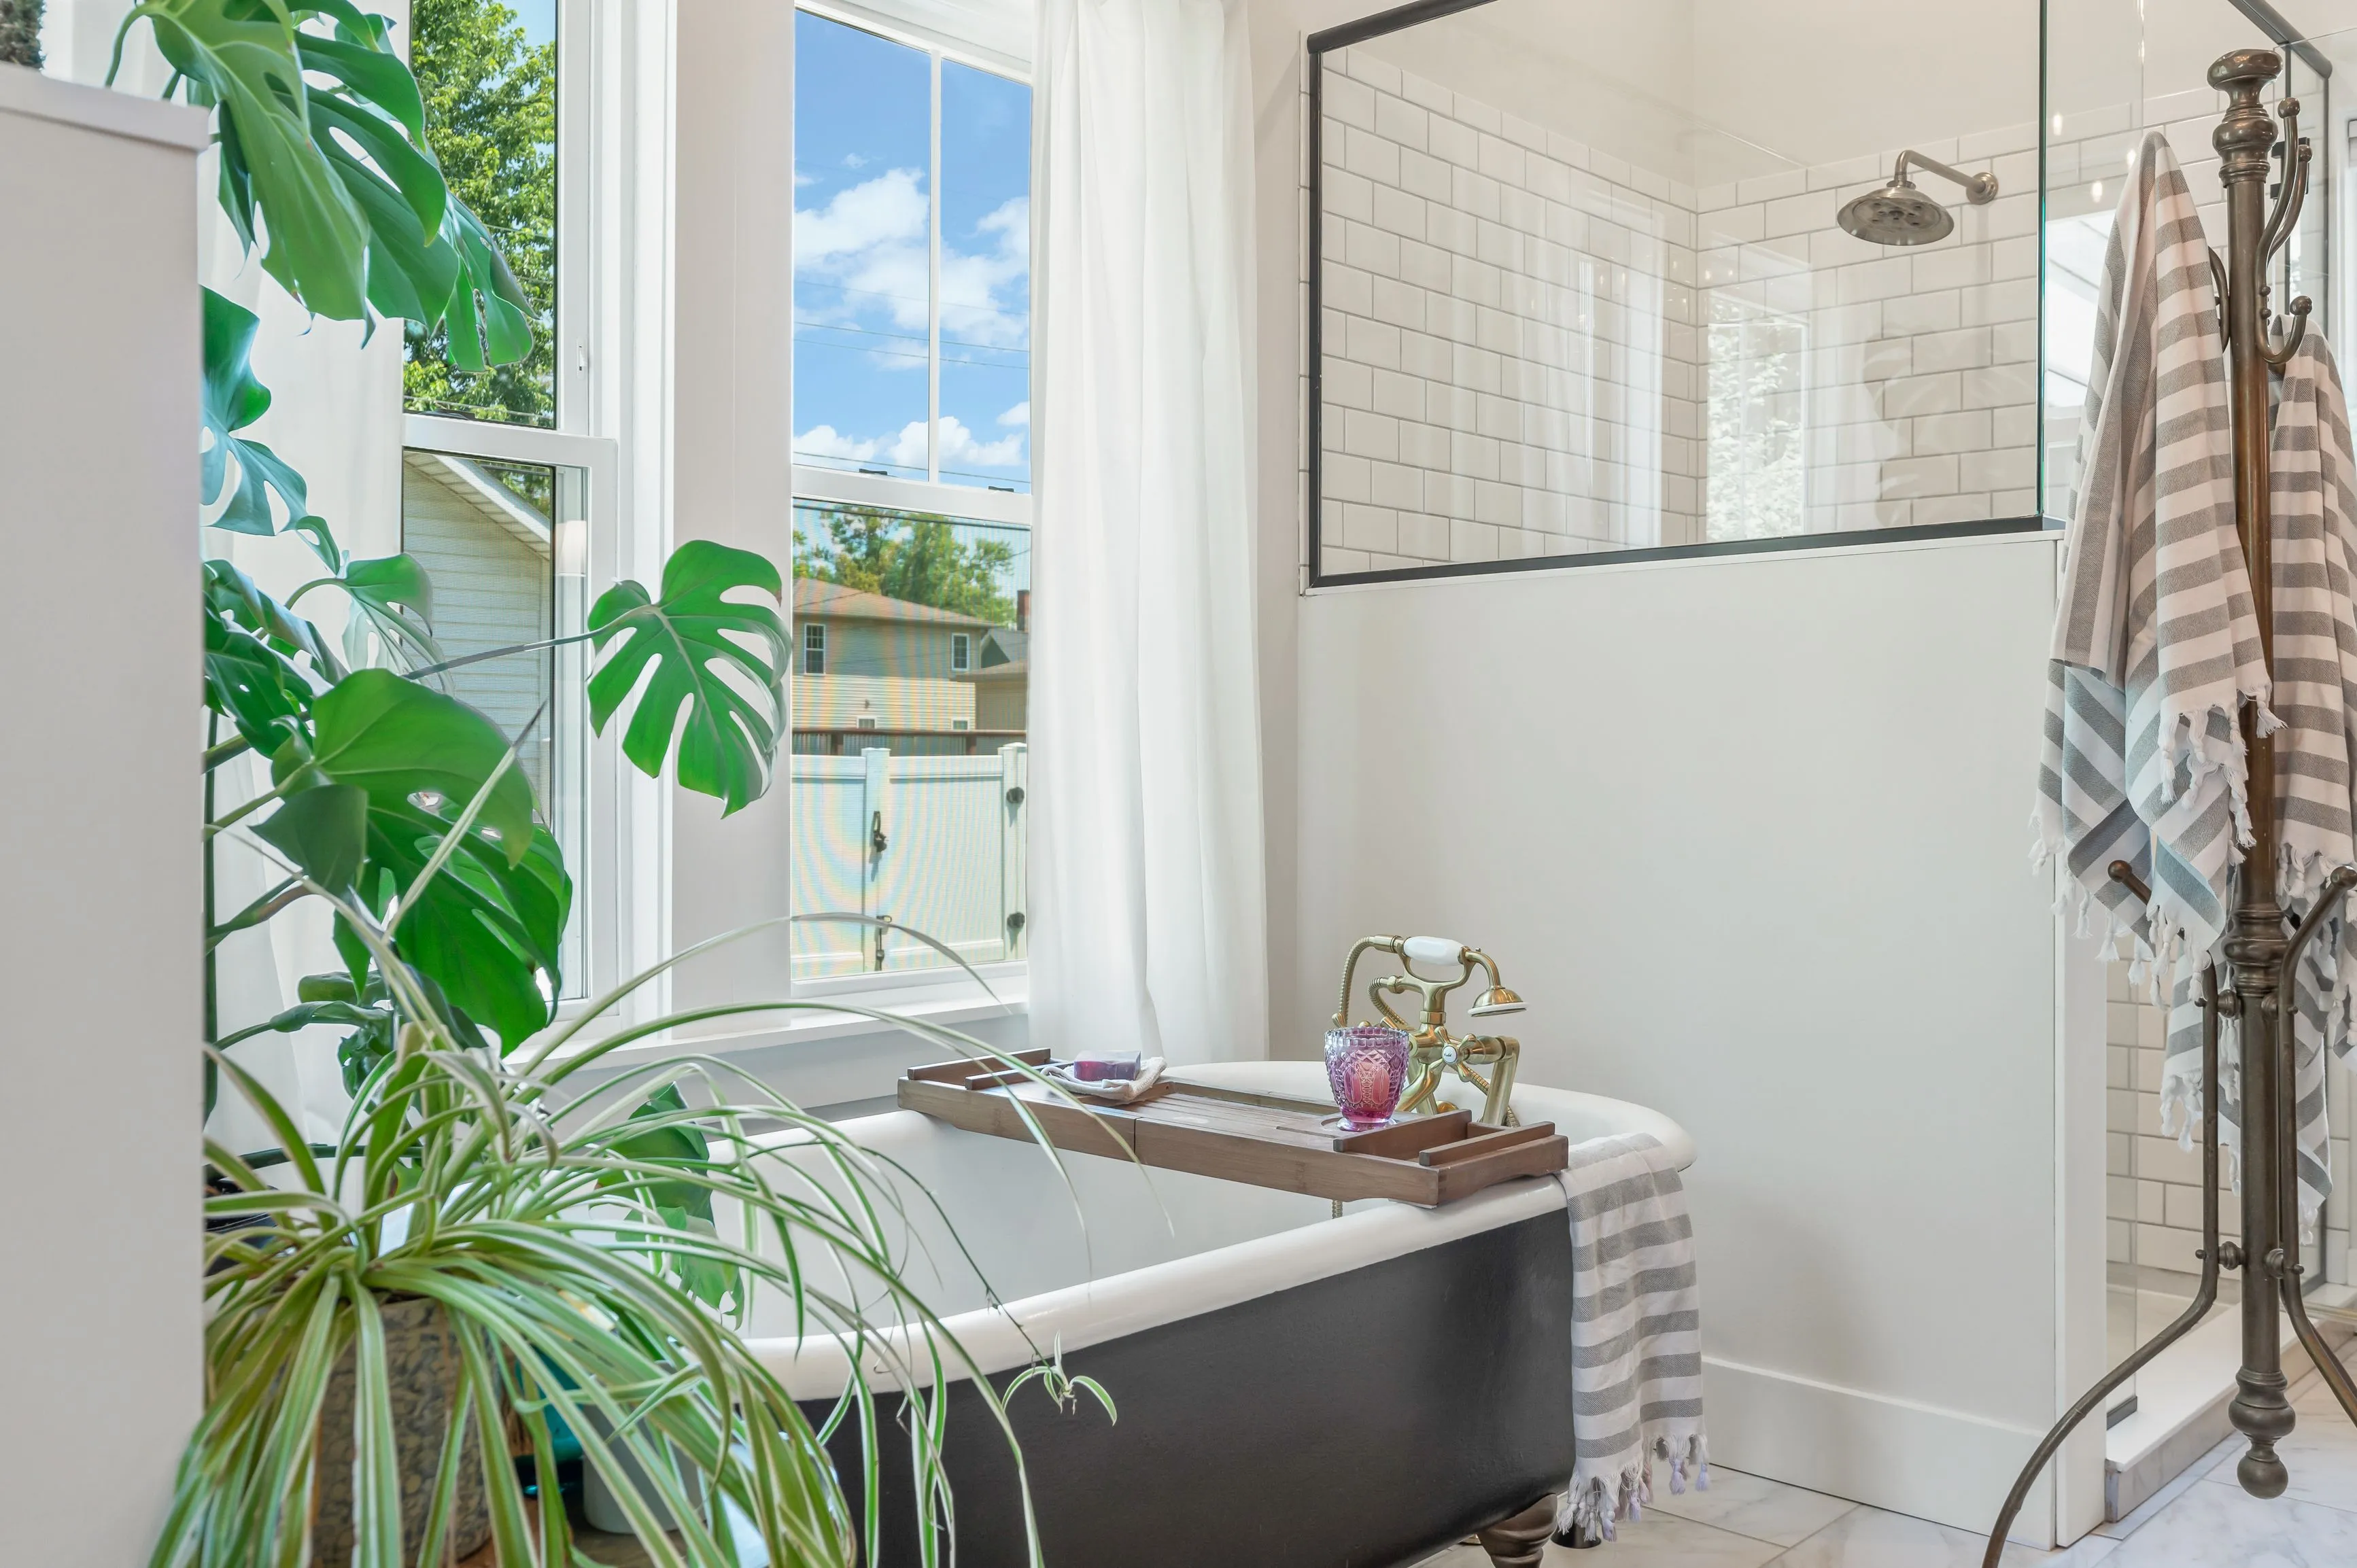 Bright bathroom interior with a freestanding tub, potted plants, and natural light coming through a window.